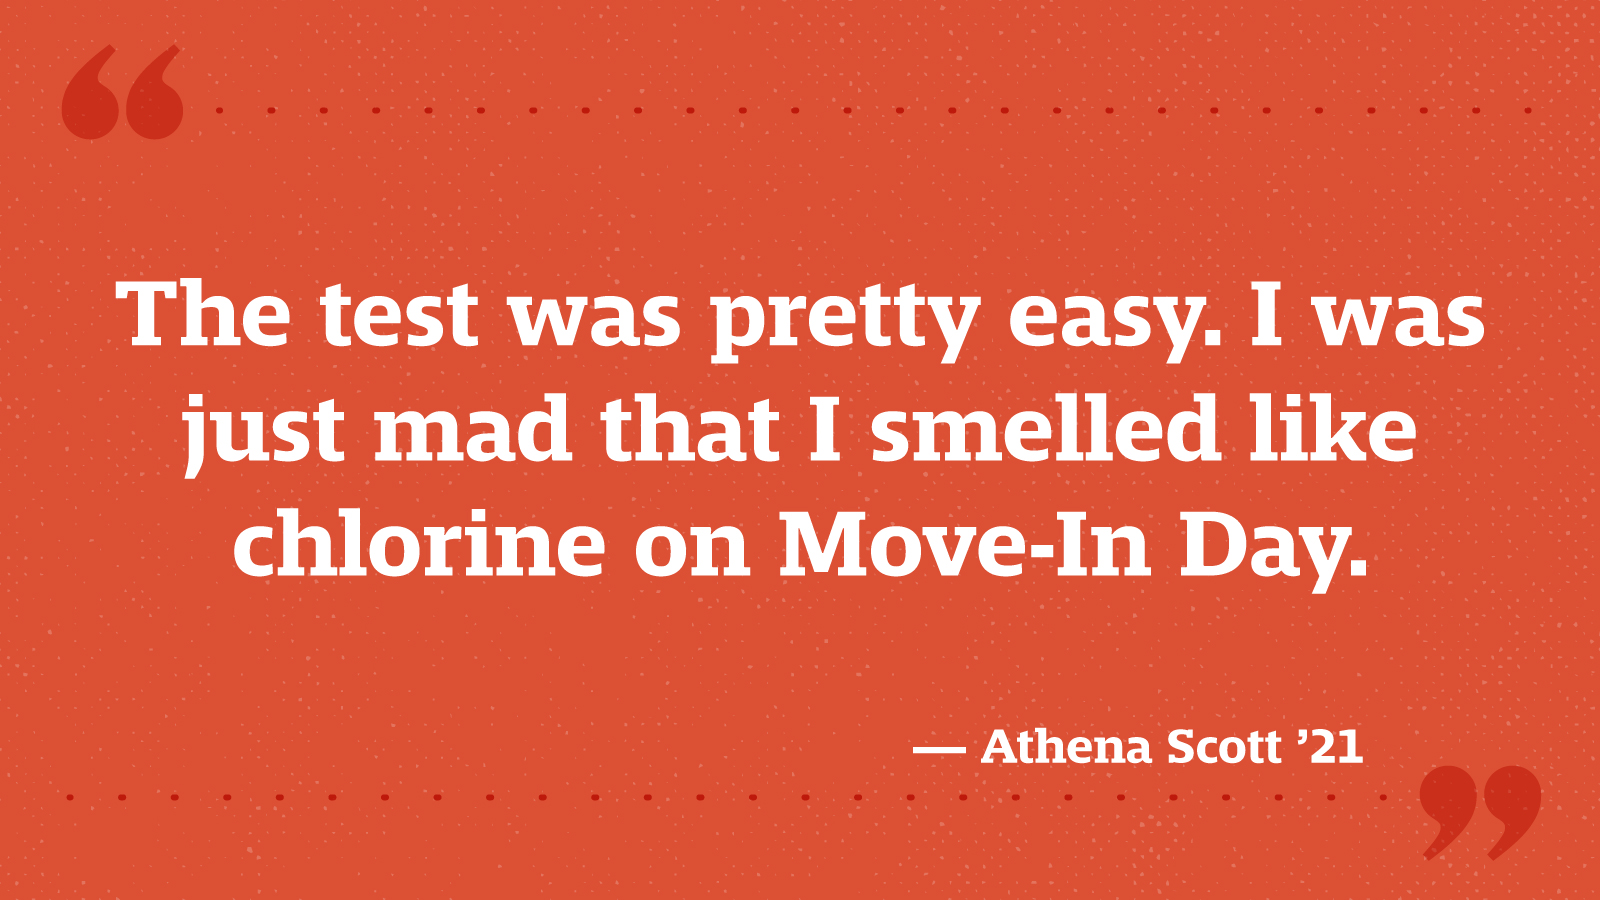 The test was pretty easy. I was just mad that I smelled like chlorine on Move-In Day. — Athena Scott ’21